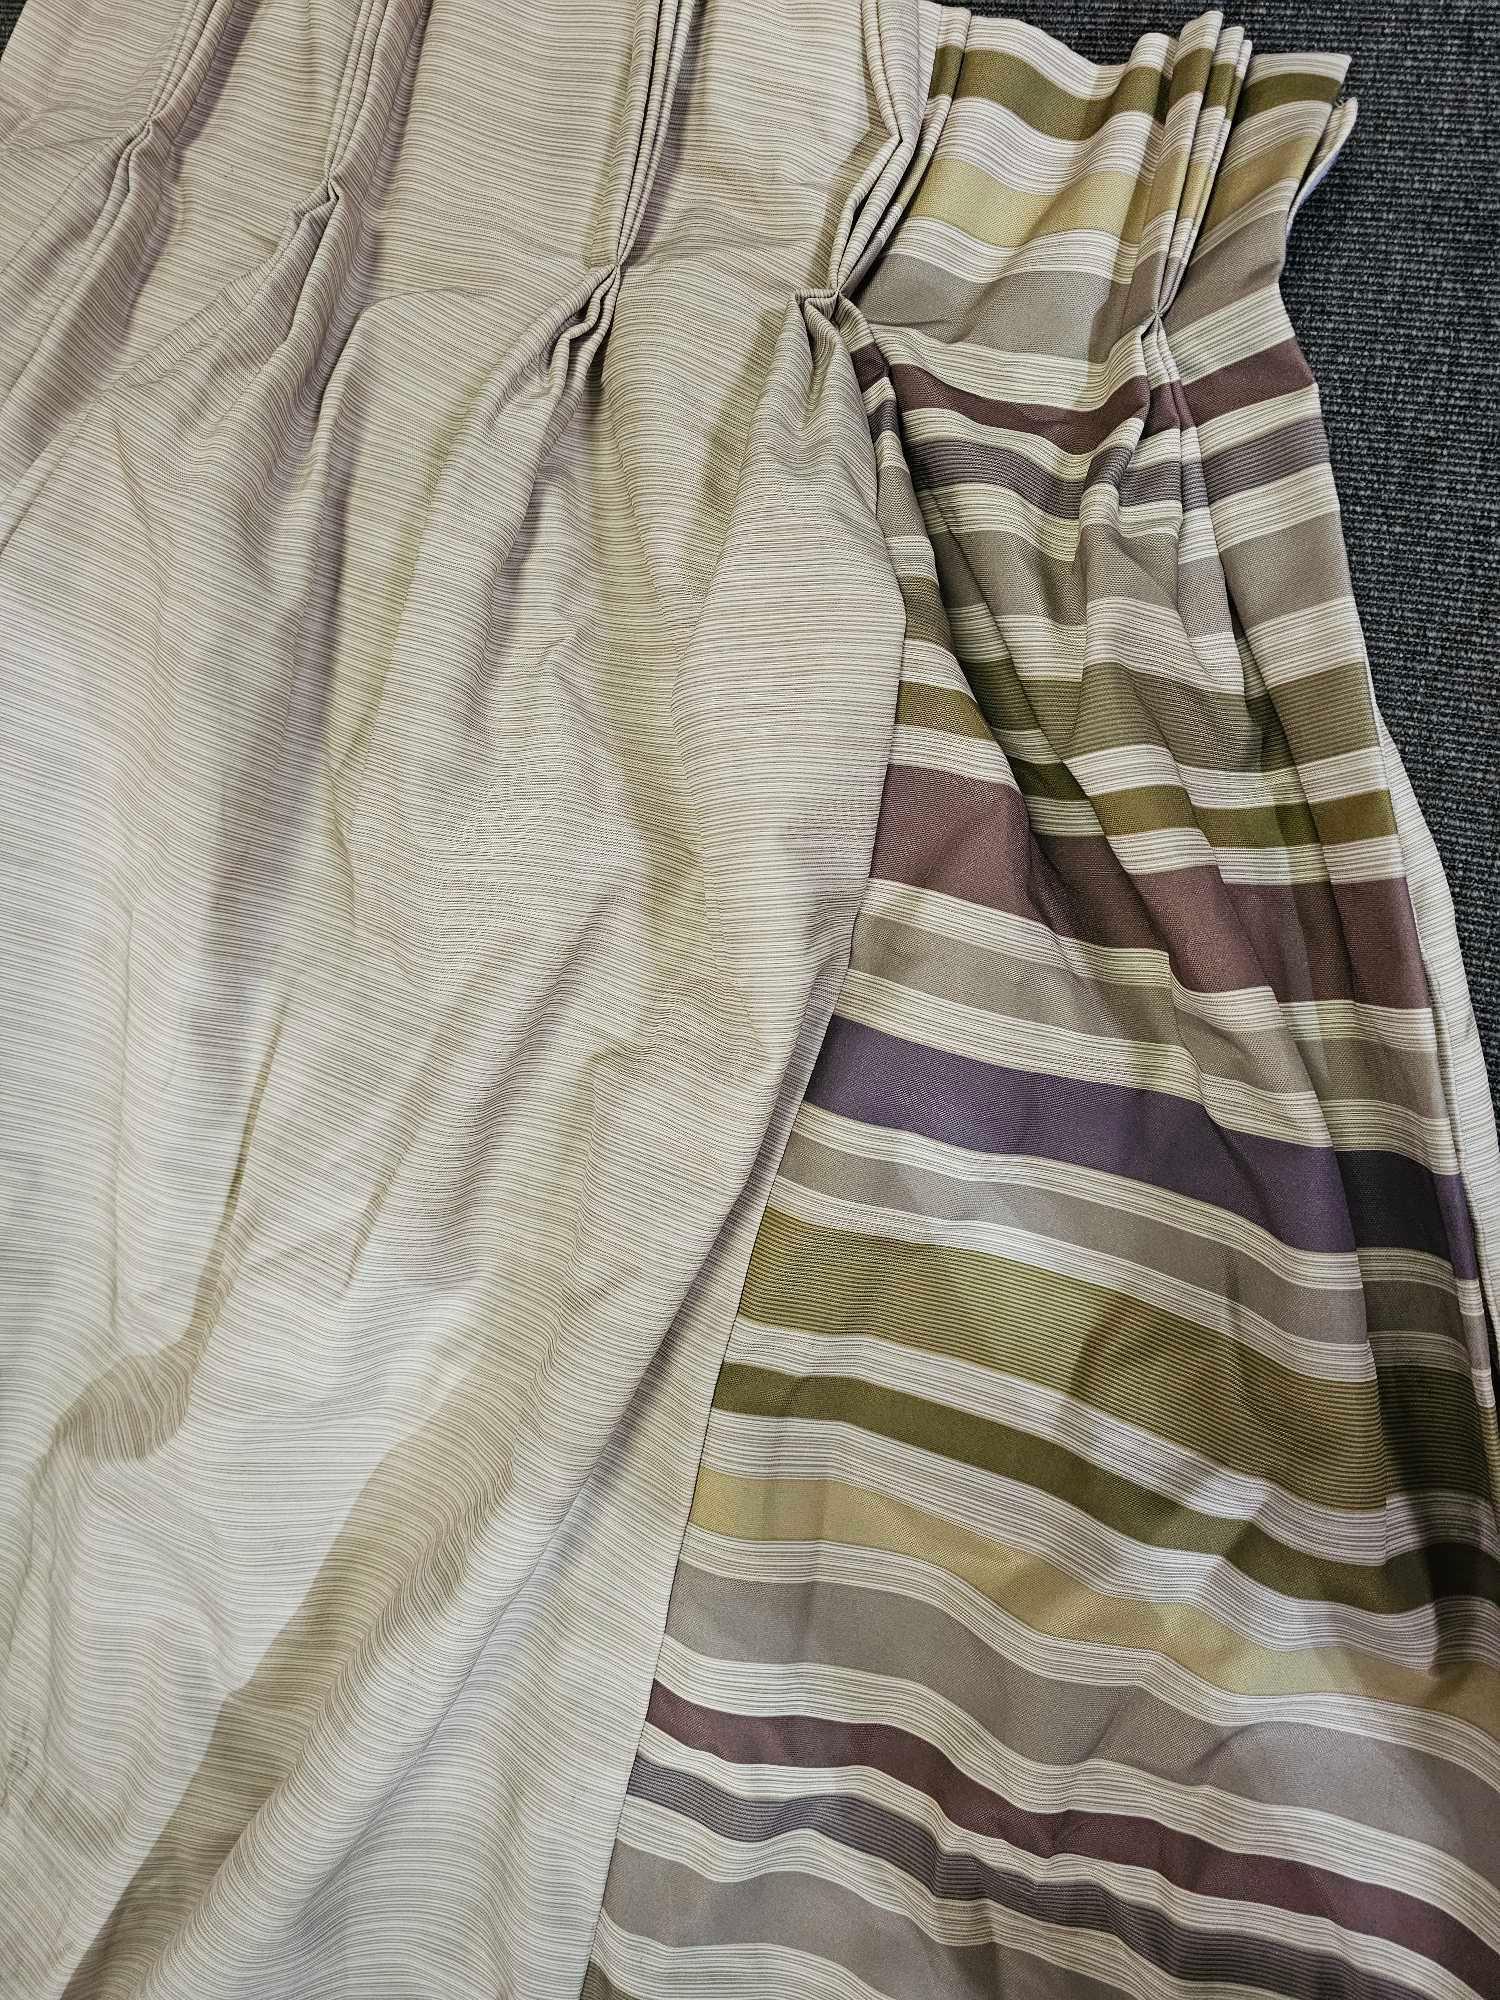 A Pair Of Curtains Striped Edge Purple/Green/Beige/Lime/Brown Size 284 x 250cm ( Ref Red 162) - Image 2 of 2